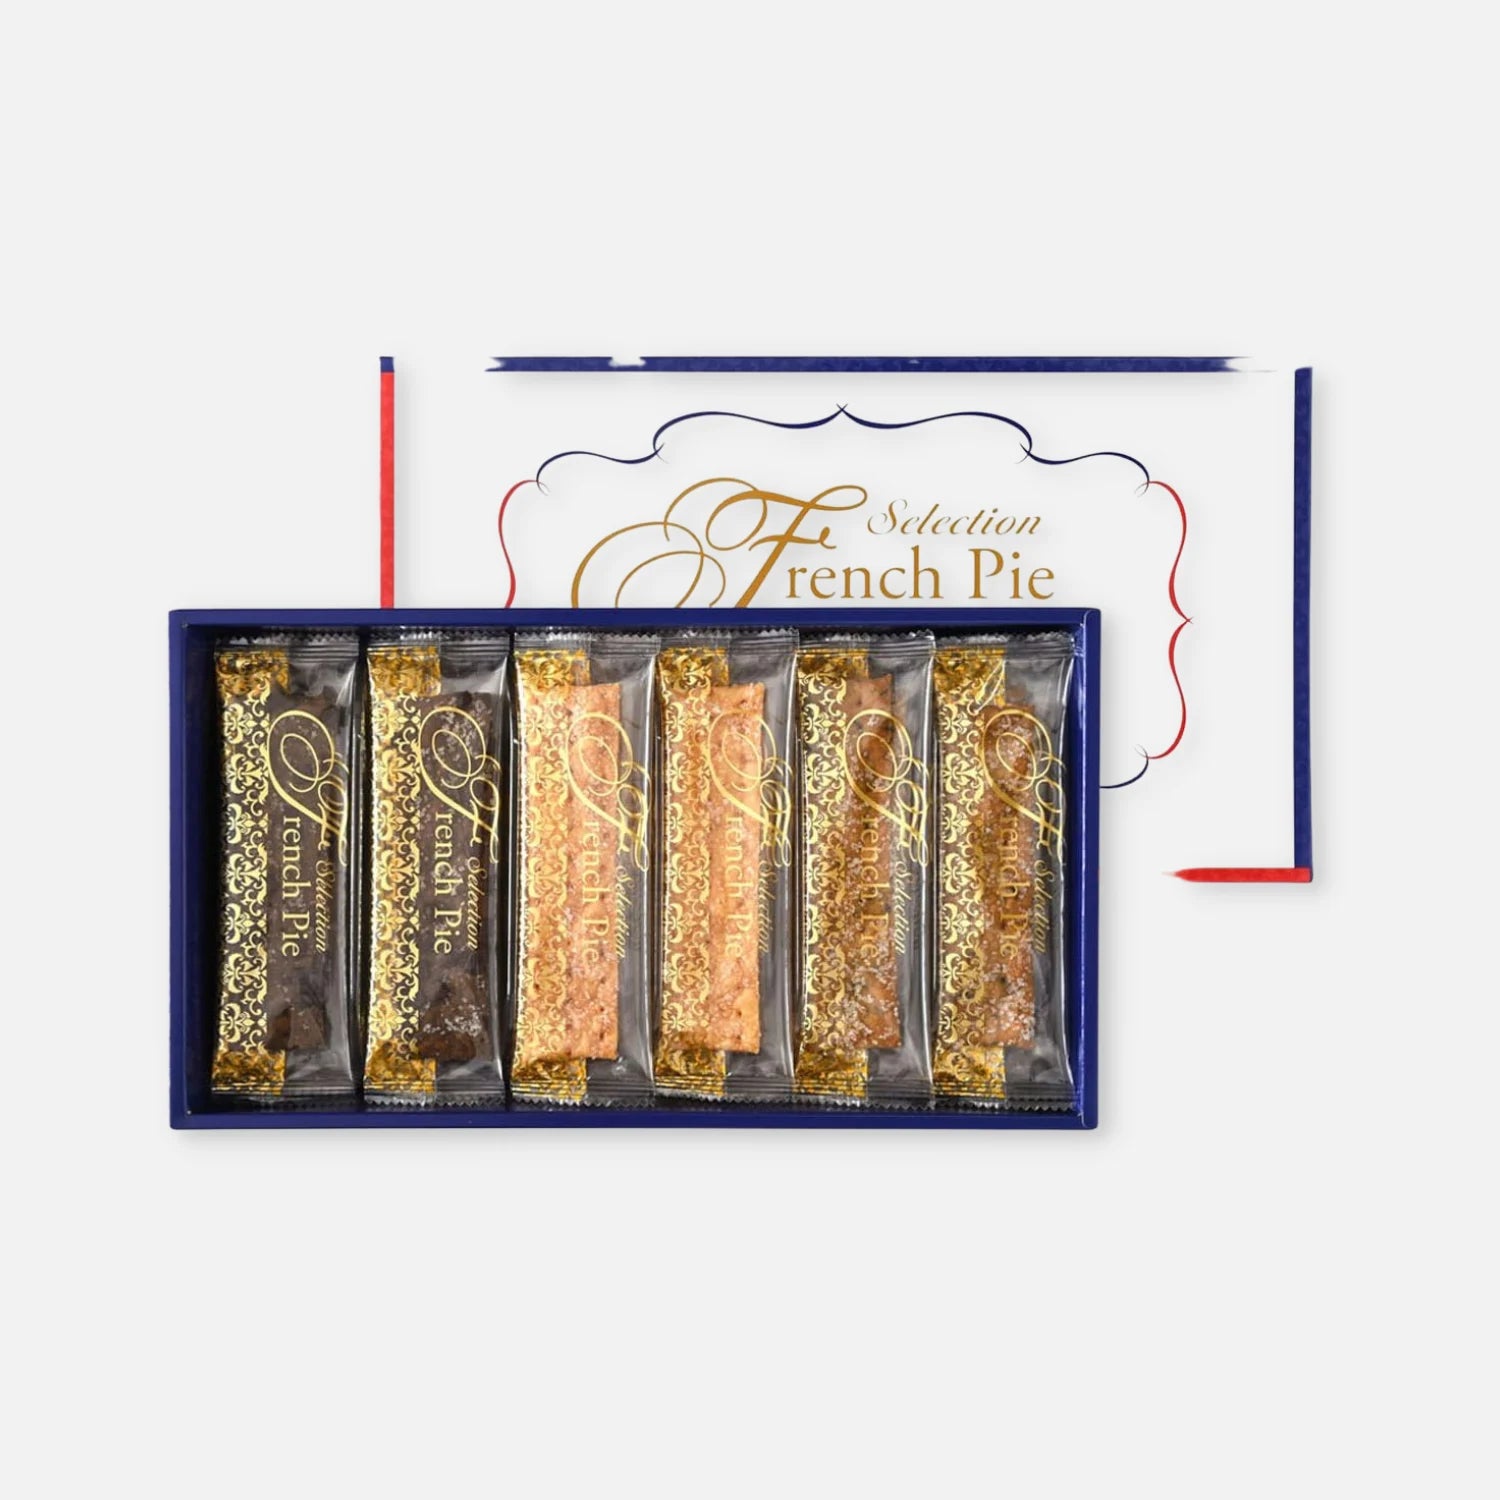 Colombim Selection French Pie Gift Set (10 Pieces/30 Pieces) - Buy Me Japan